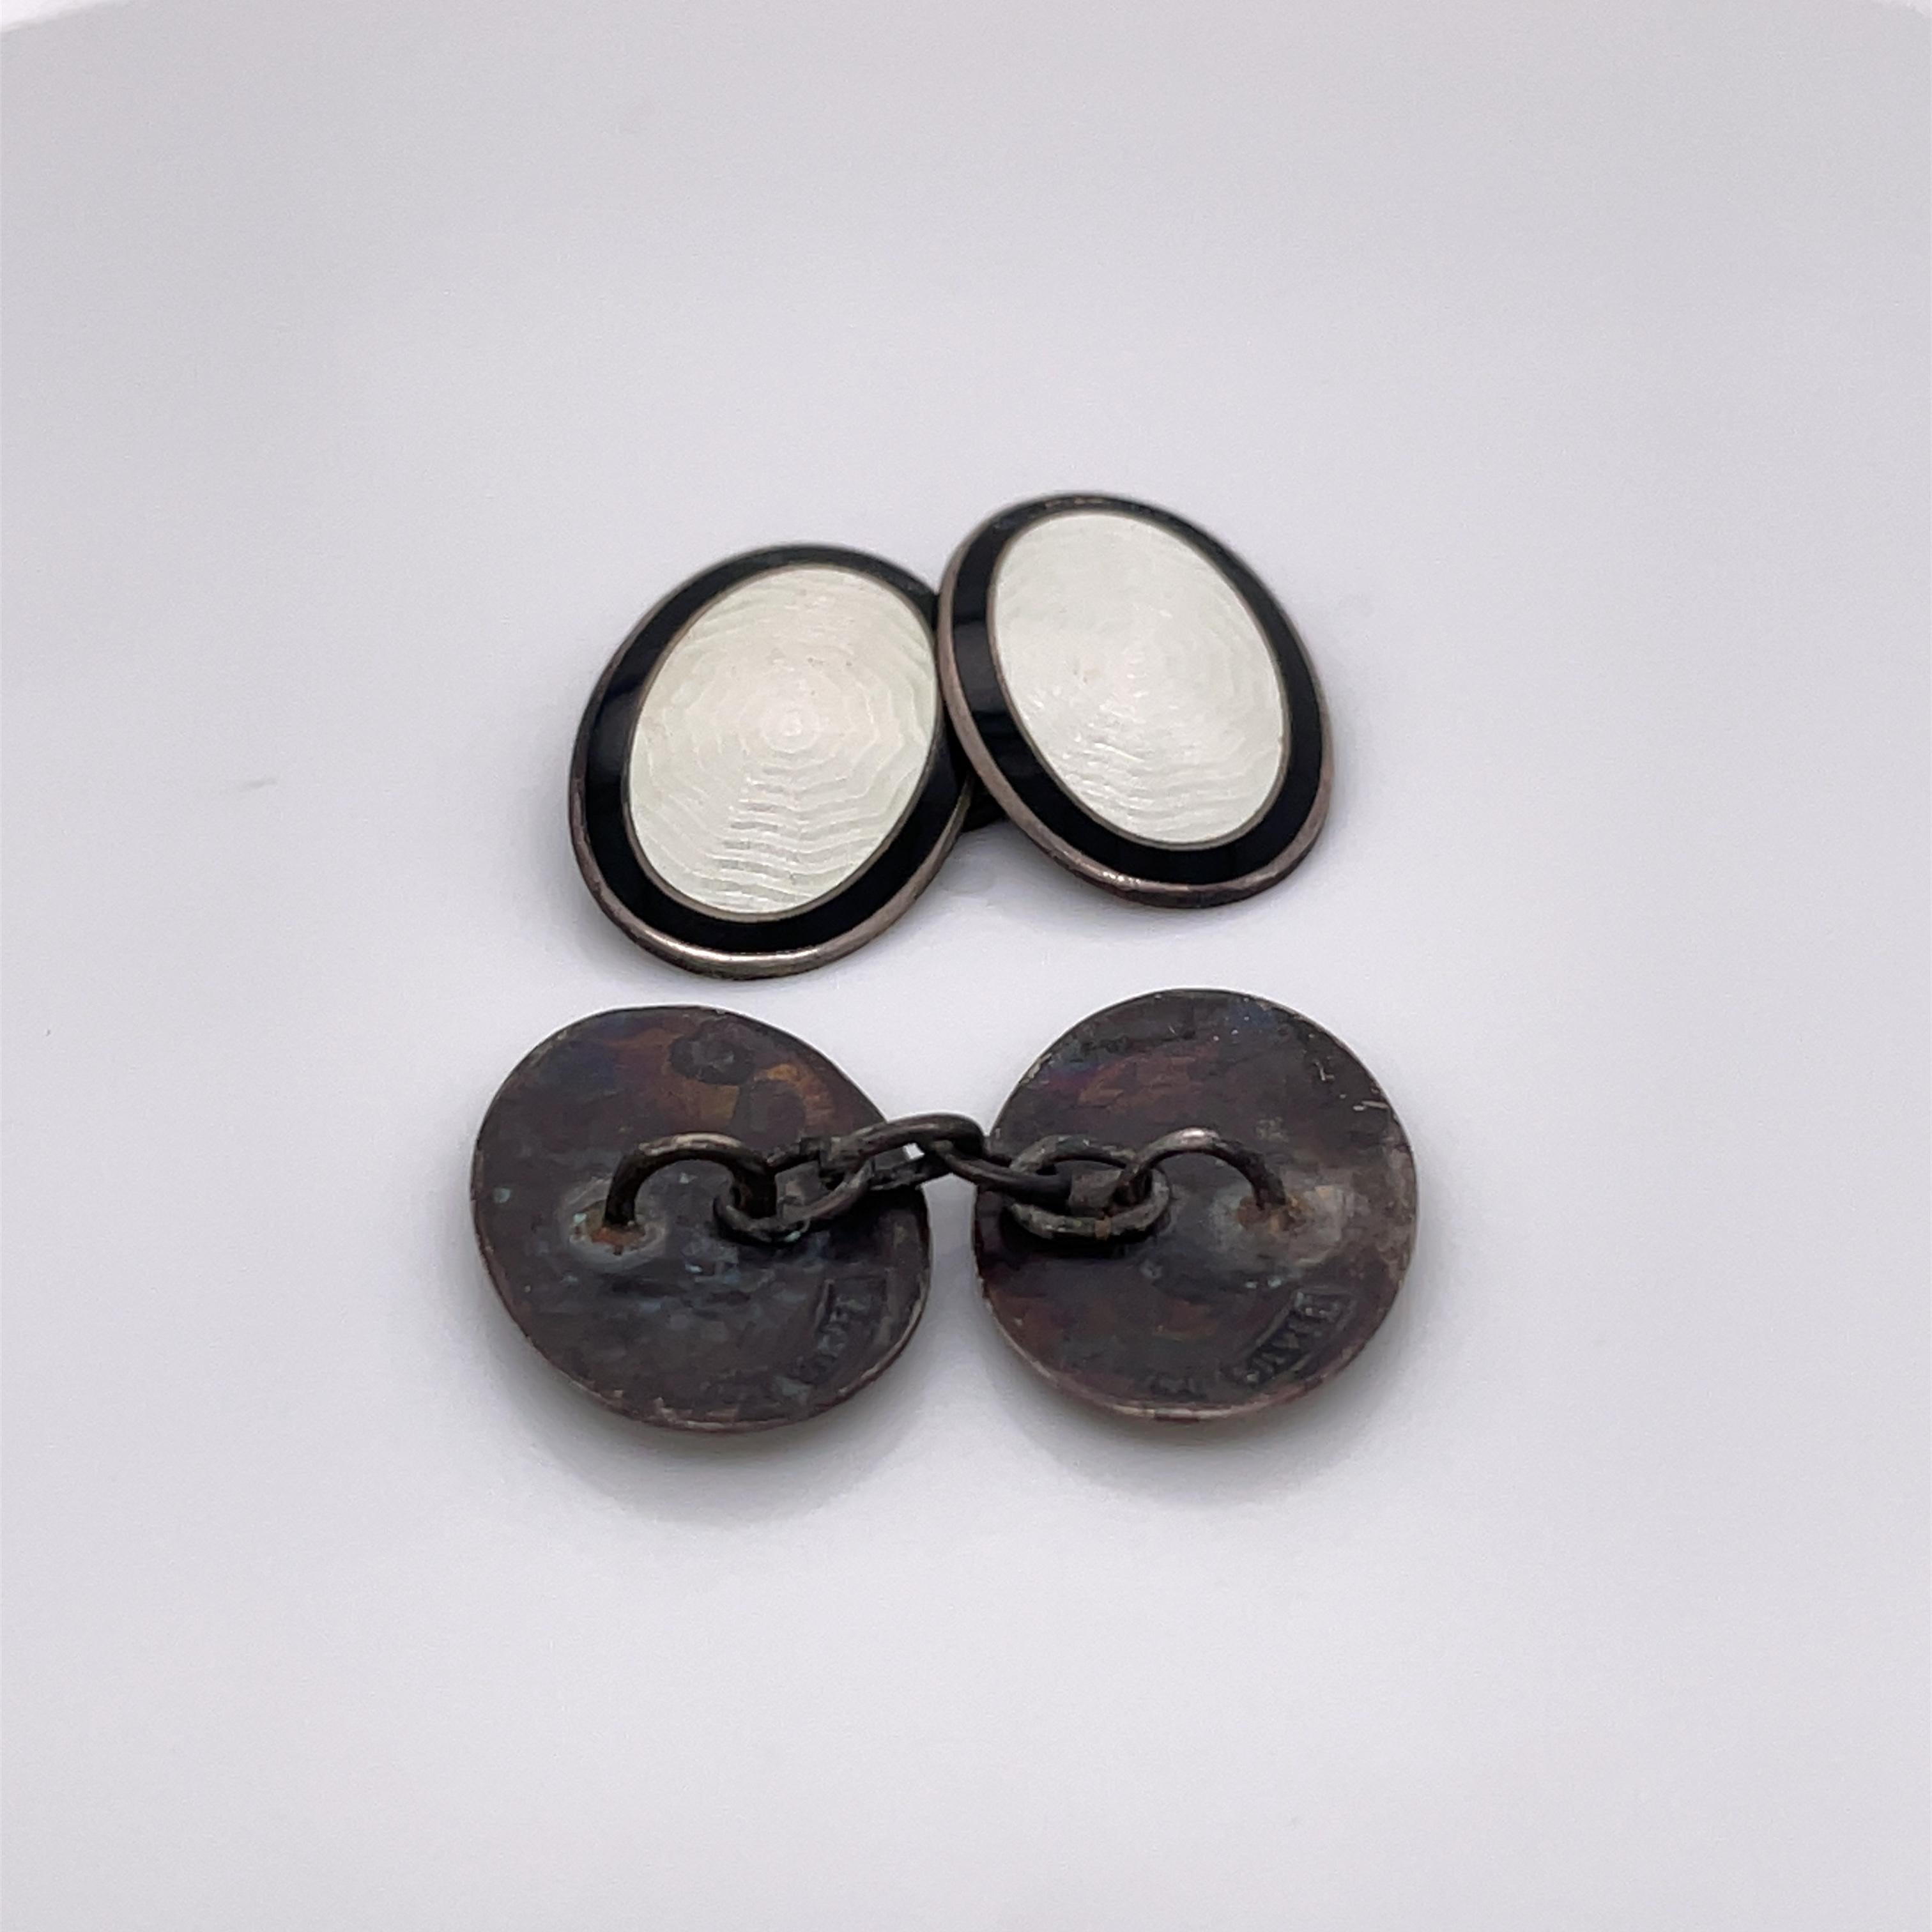 1925 Art Deco Black and White Enamel Sterling Silver Cufflinks In Excellent Condition For Sale In Lexington, KY